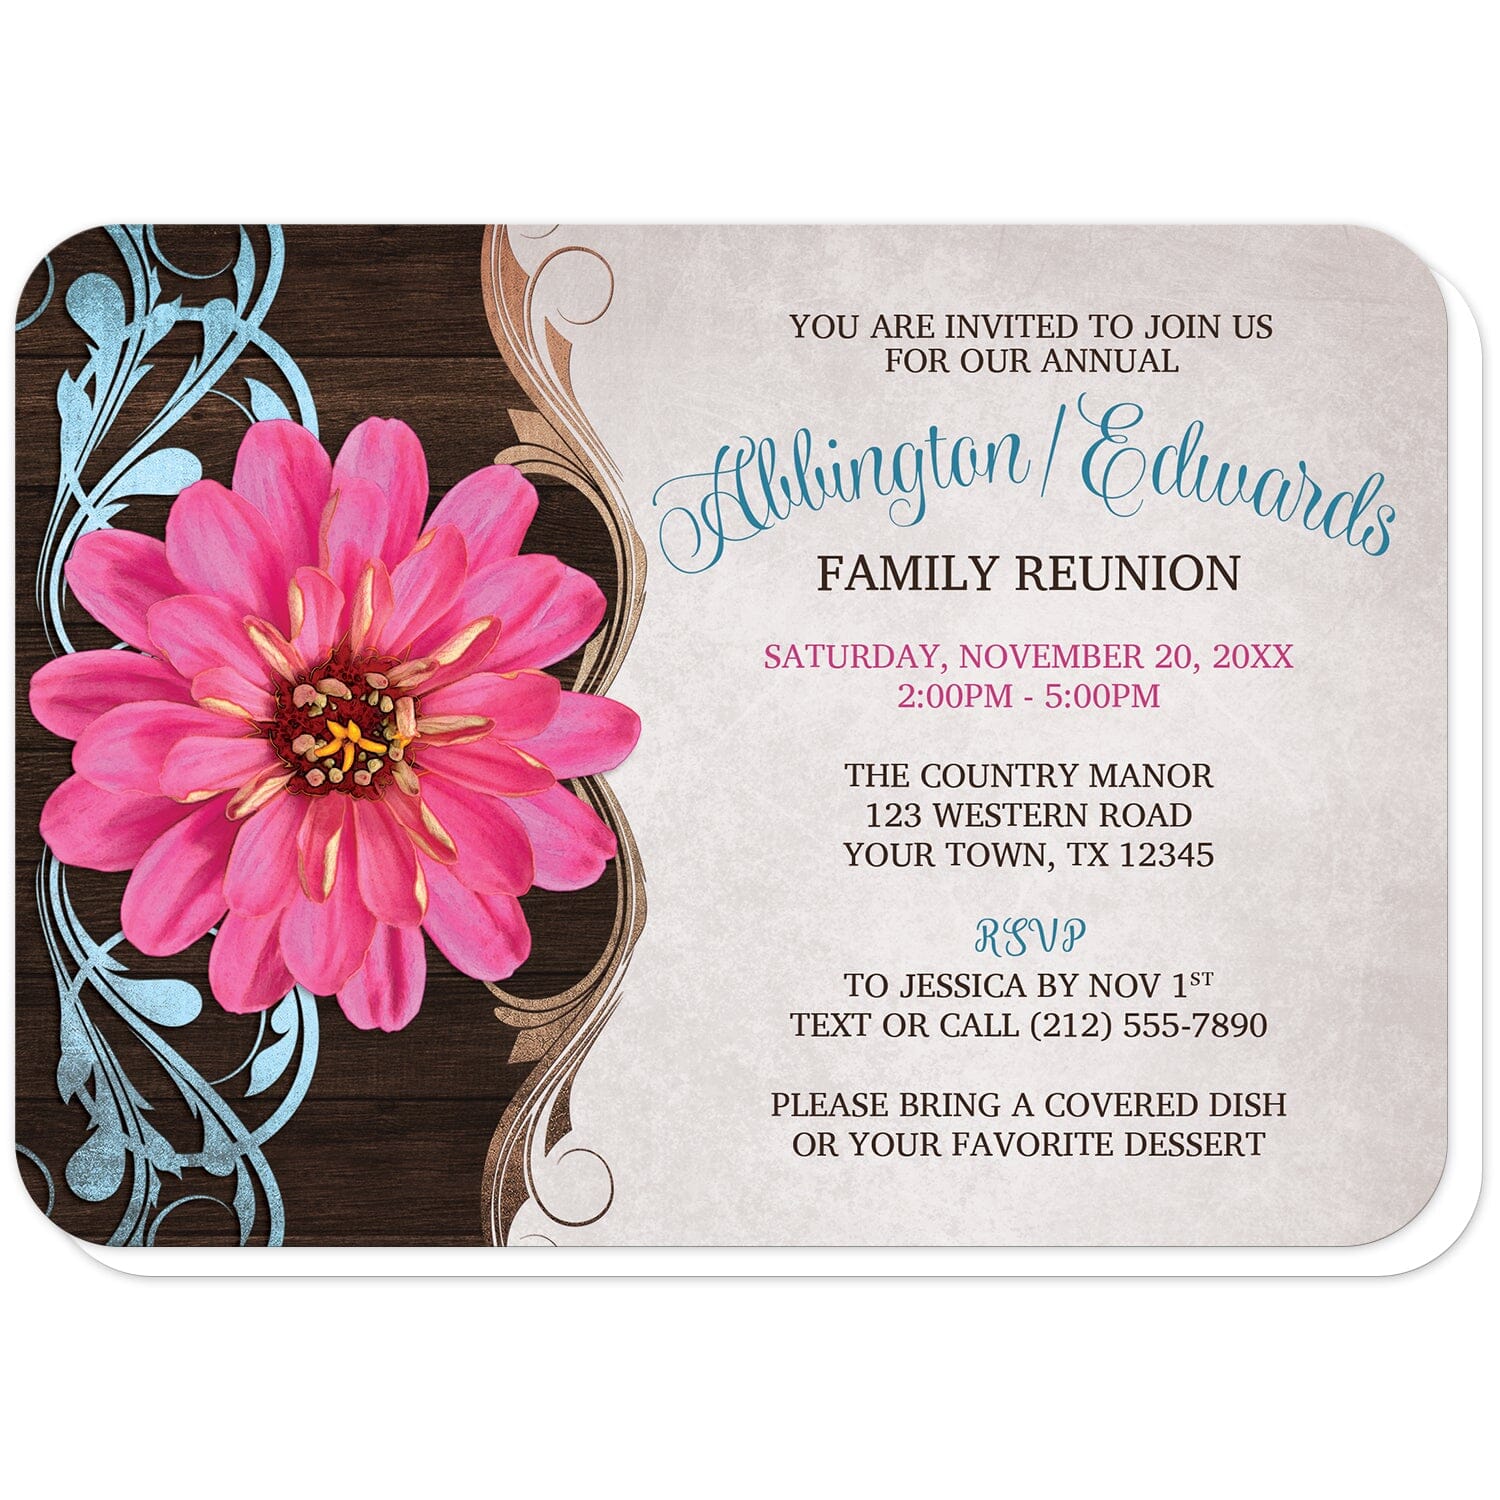 Rustic Country Pink Zinnia Family Reunion Invitations (with rounded corners) at Artistically Invited. Southern-inspired rustic country pink zinnia family reunion invitations with a pretty and vibrant pink zinnia flower over a brown wood pattern with blue and tan flourishes along the left side. Your personalized reunion celebration details are custom printed in brown, blue, and pink over a light parchment-colored background.